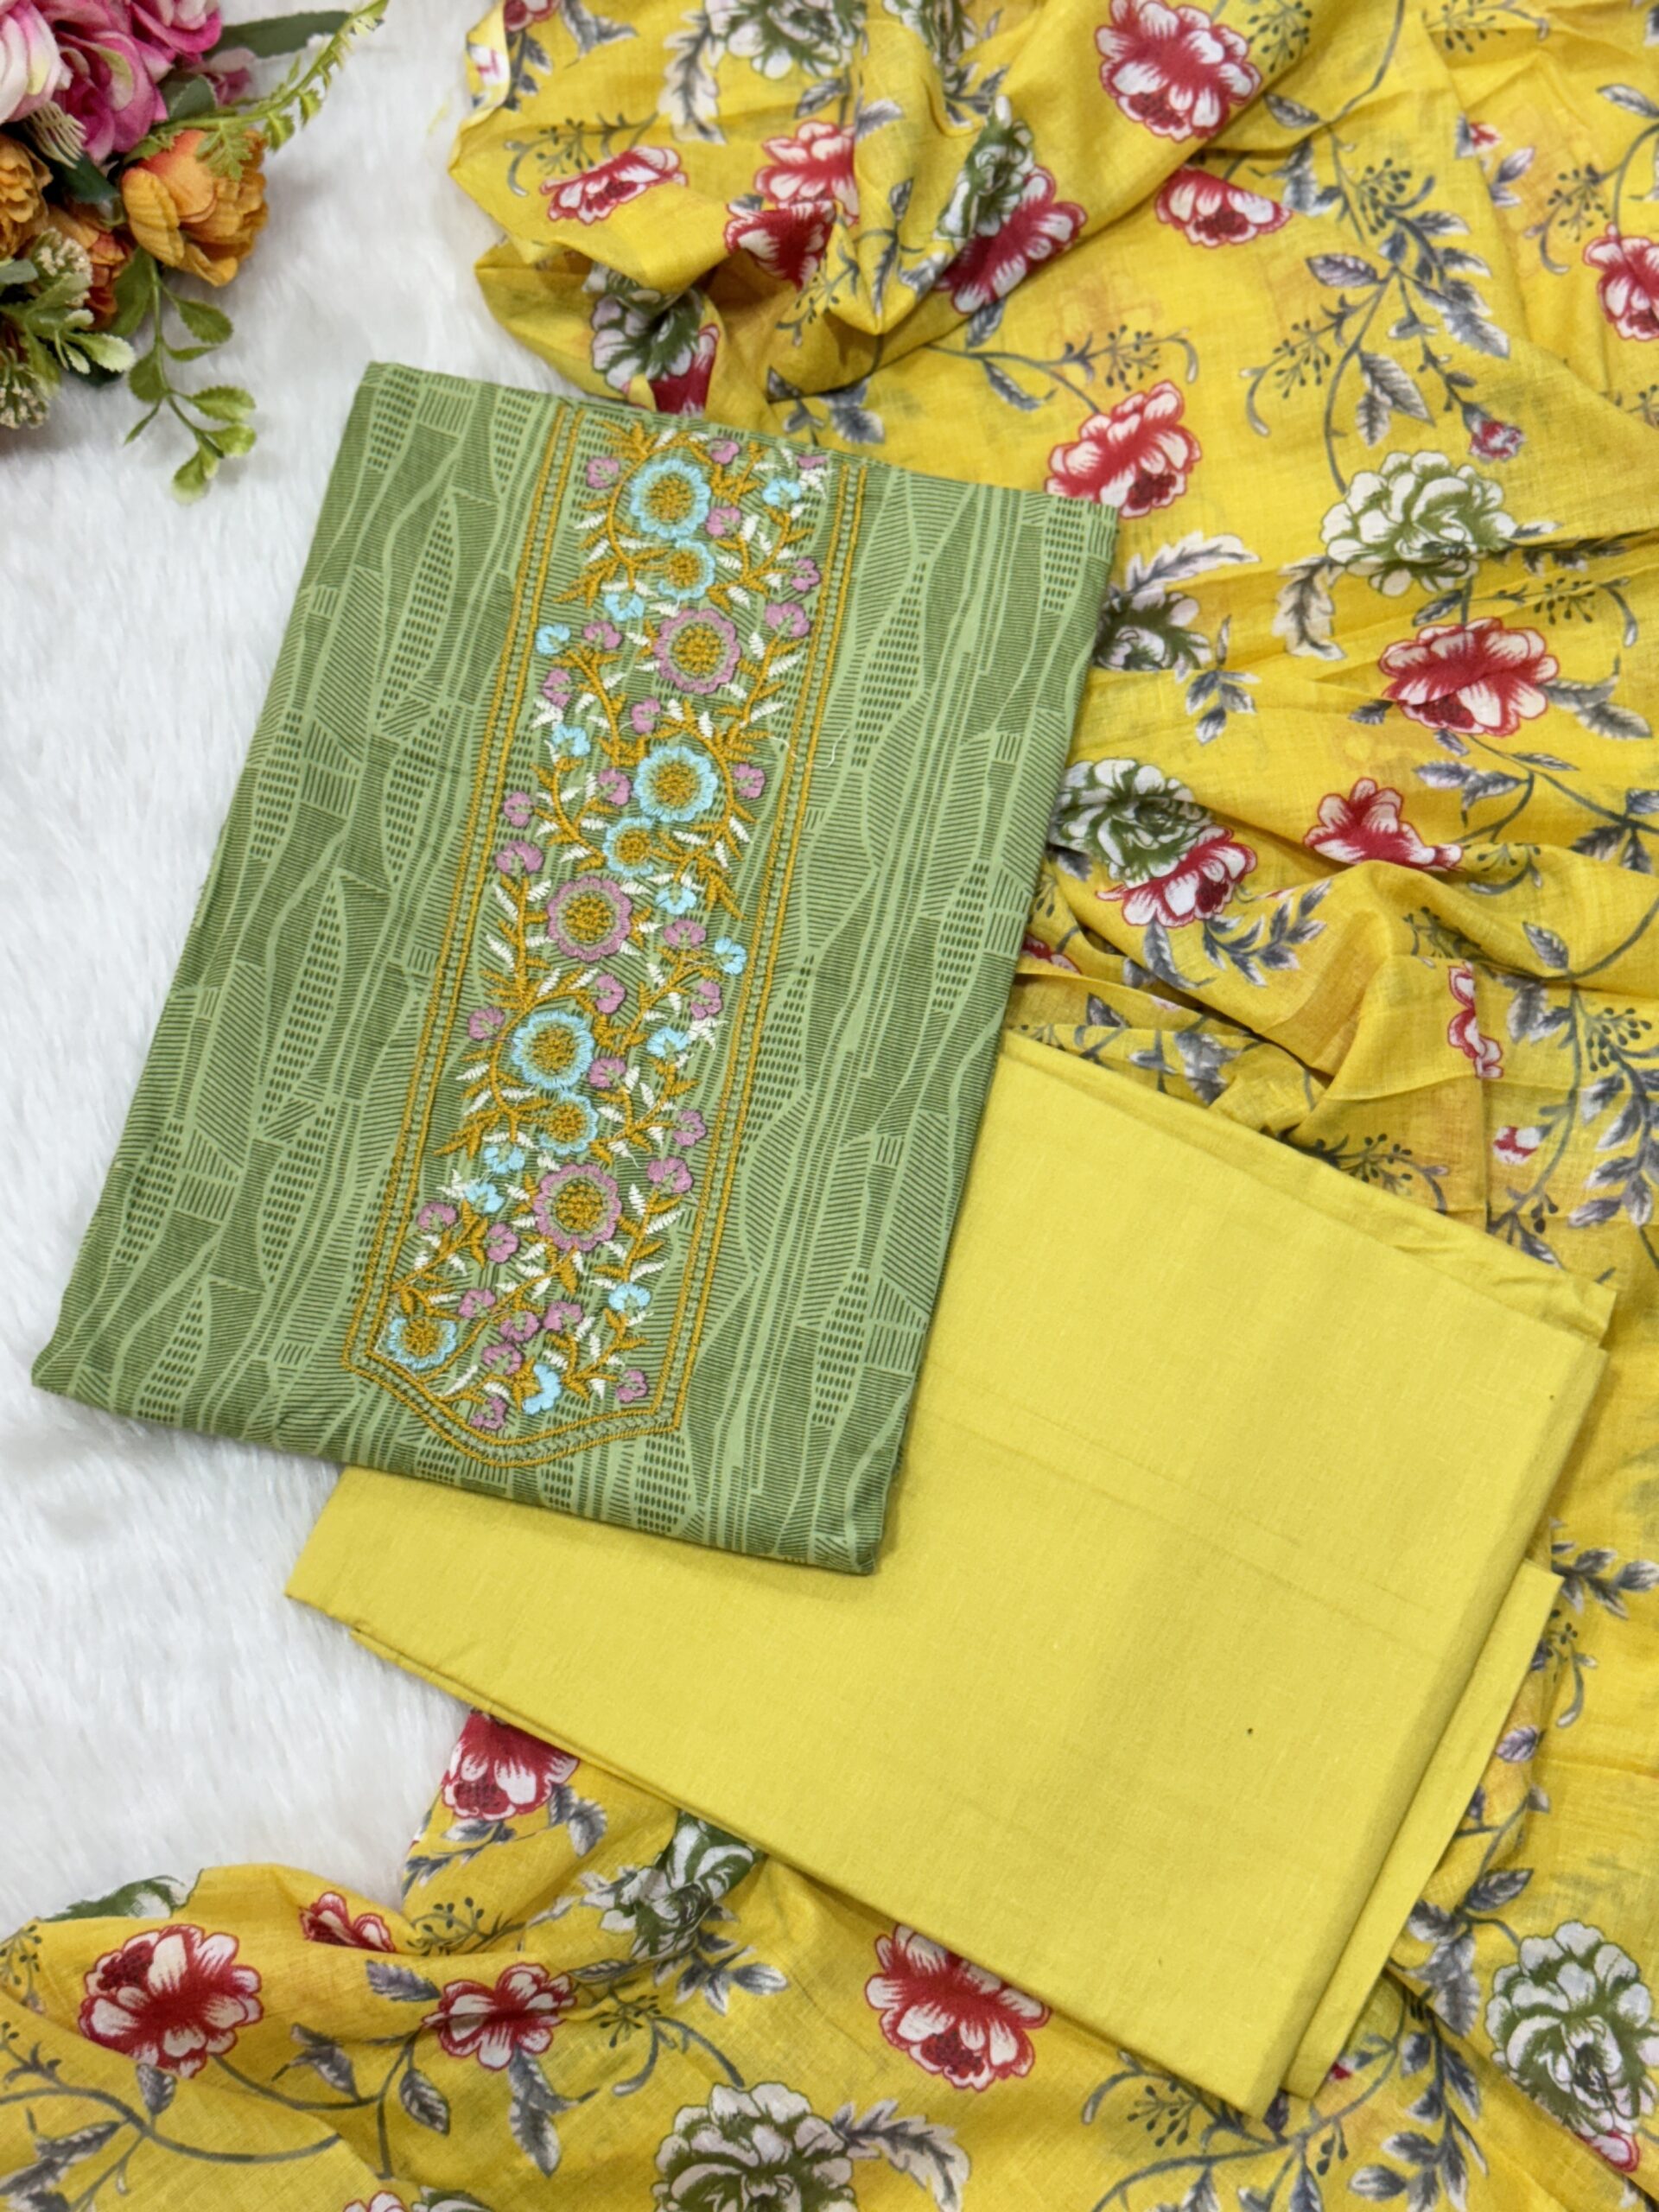 pure cotton material has sequins, embroidery with beautiful designs